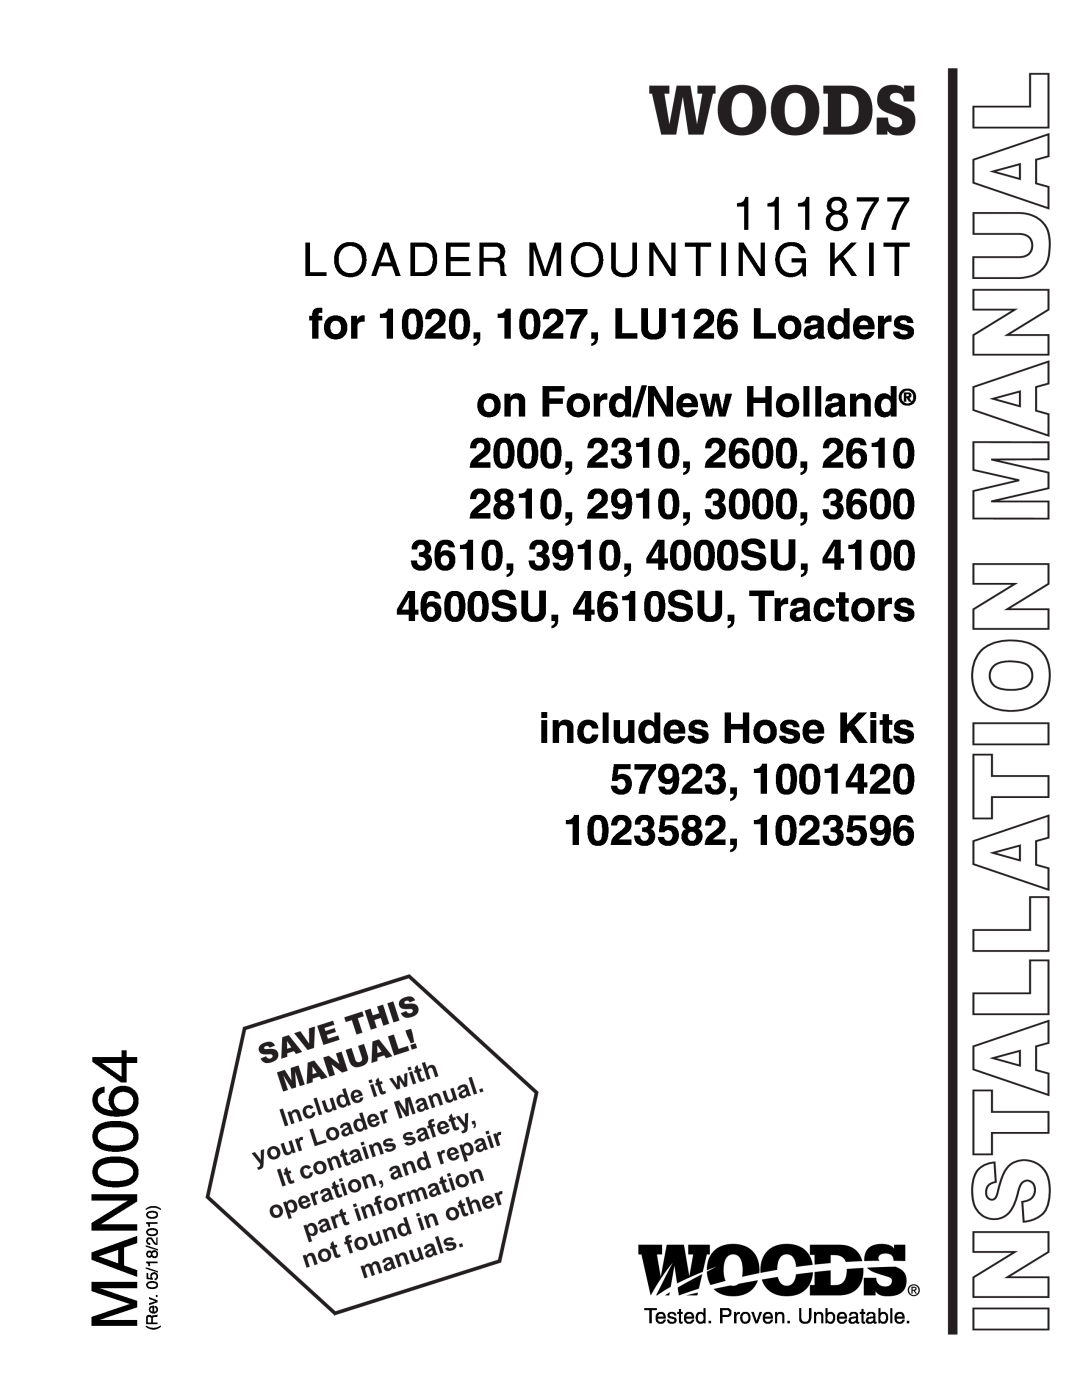 Woods Equipment 111877 manual Loader Mounting Kit, for 1020, 1027, LU126 Loaders, includes Hose Kits 57923, Save, This 